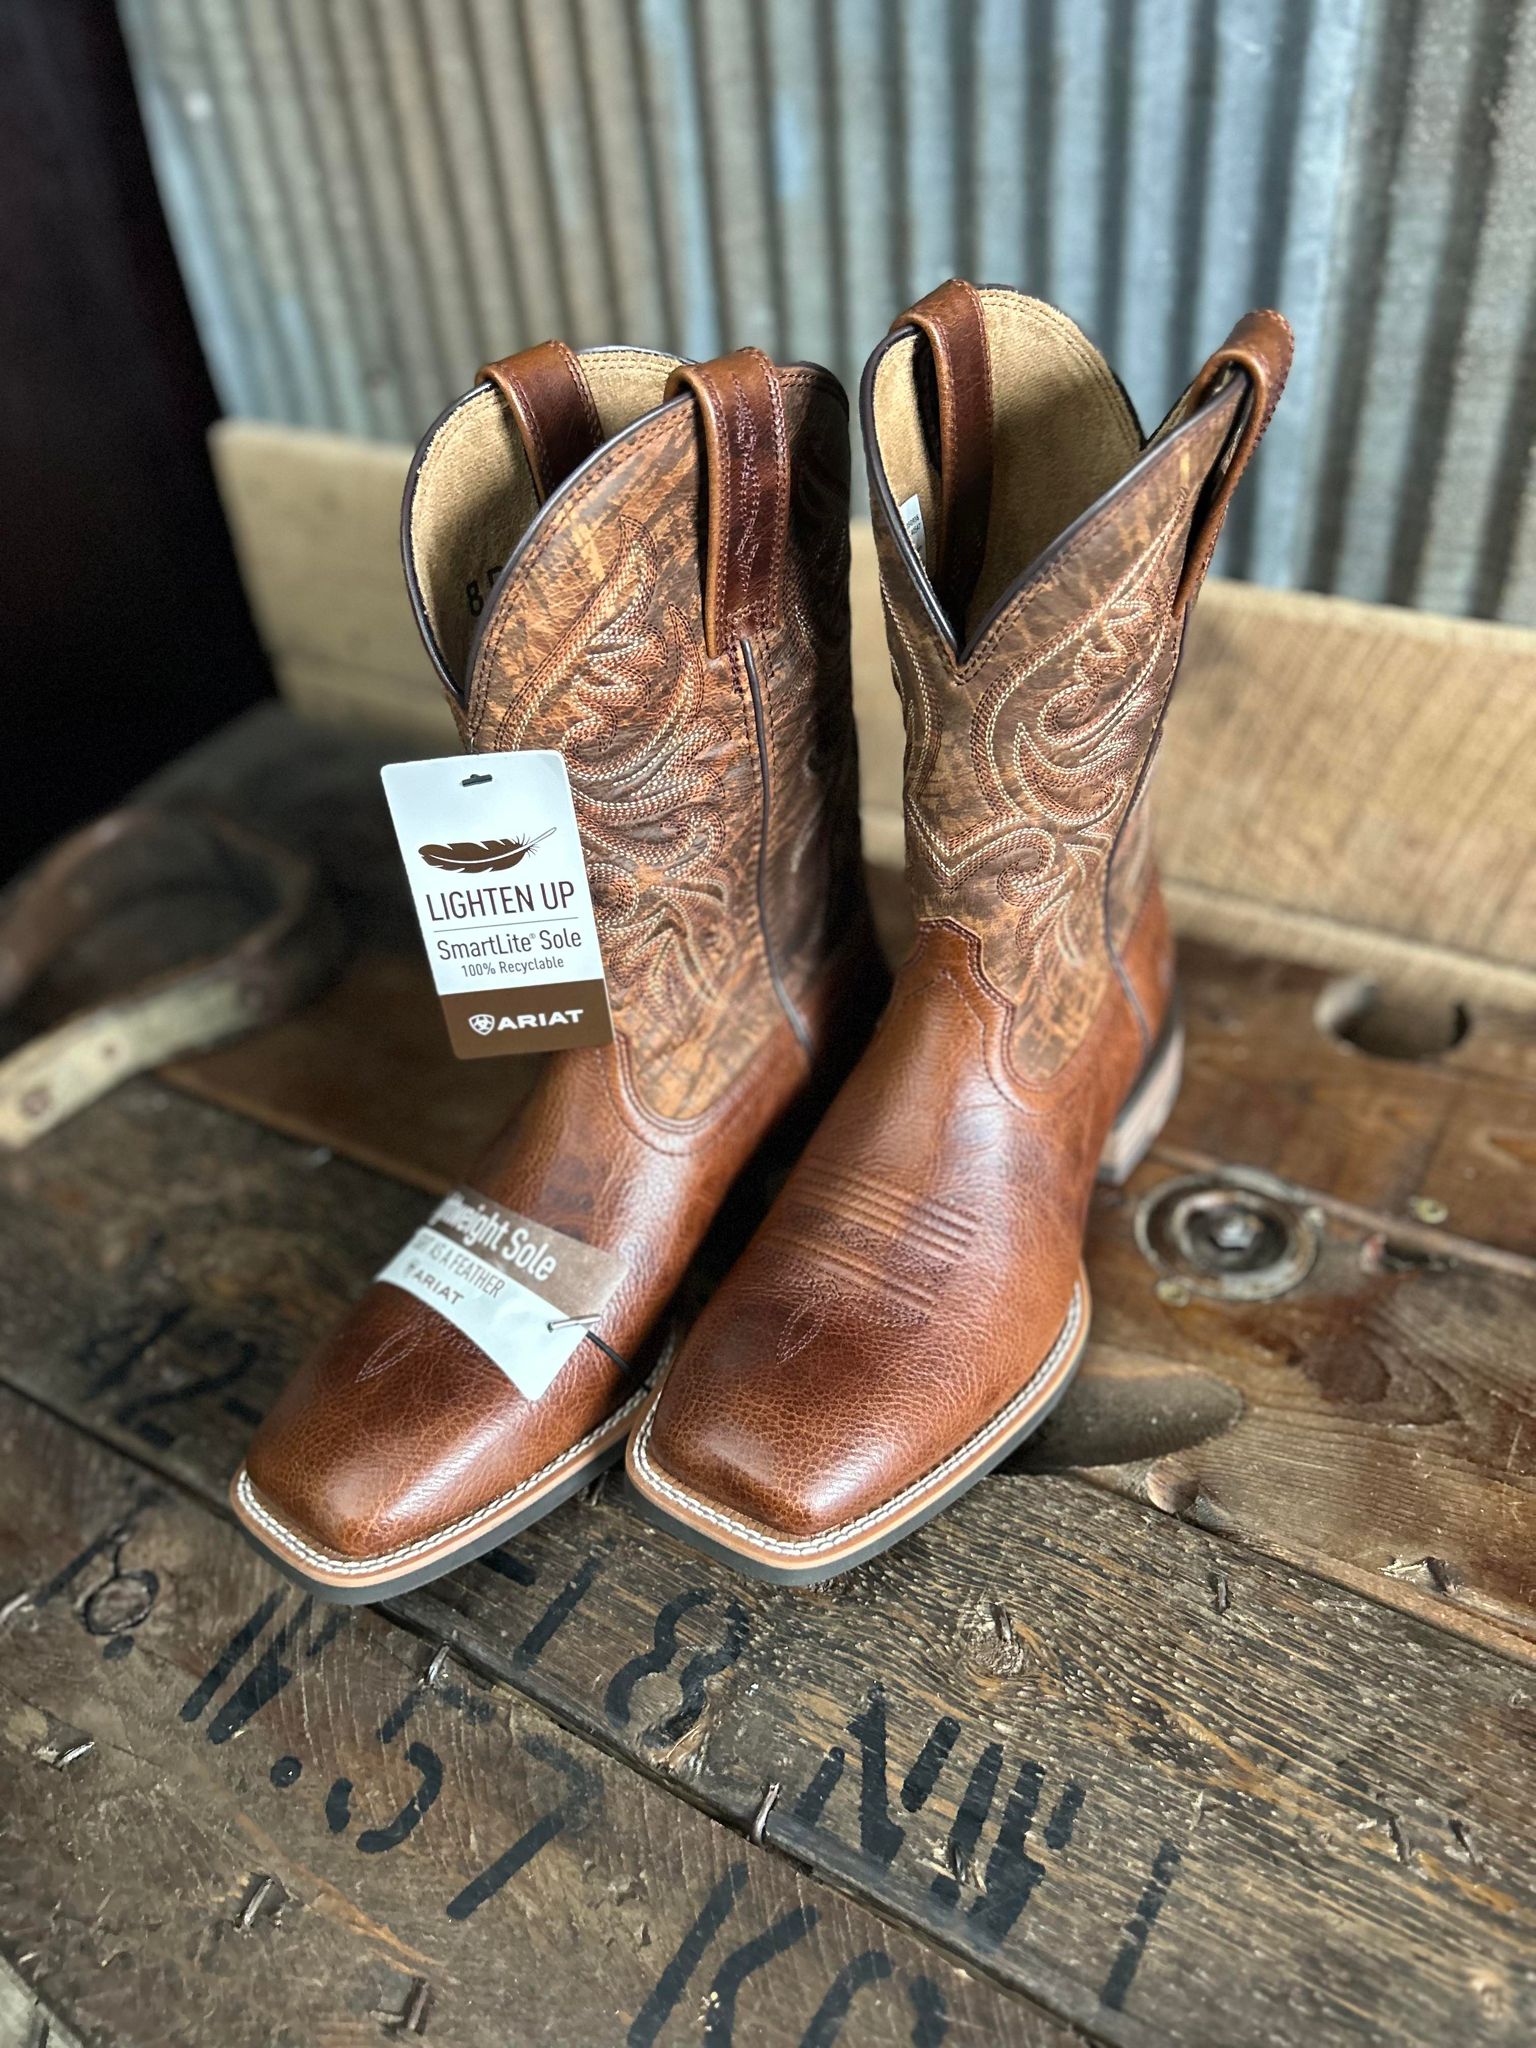 Men's Ariat Slingshot Cowboy Square Toe Boot-Men's Boots-Ariat-Lucky J Boots & More, Women's, Men's, & Kids Western Store Located in Carthage, MO